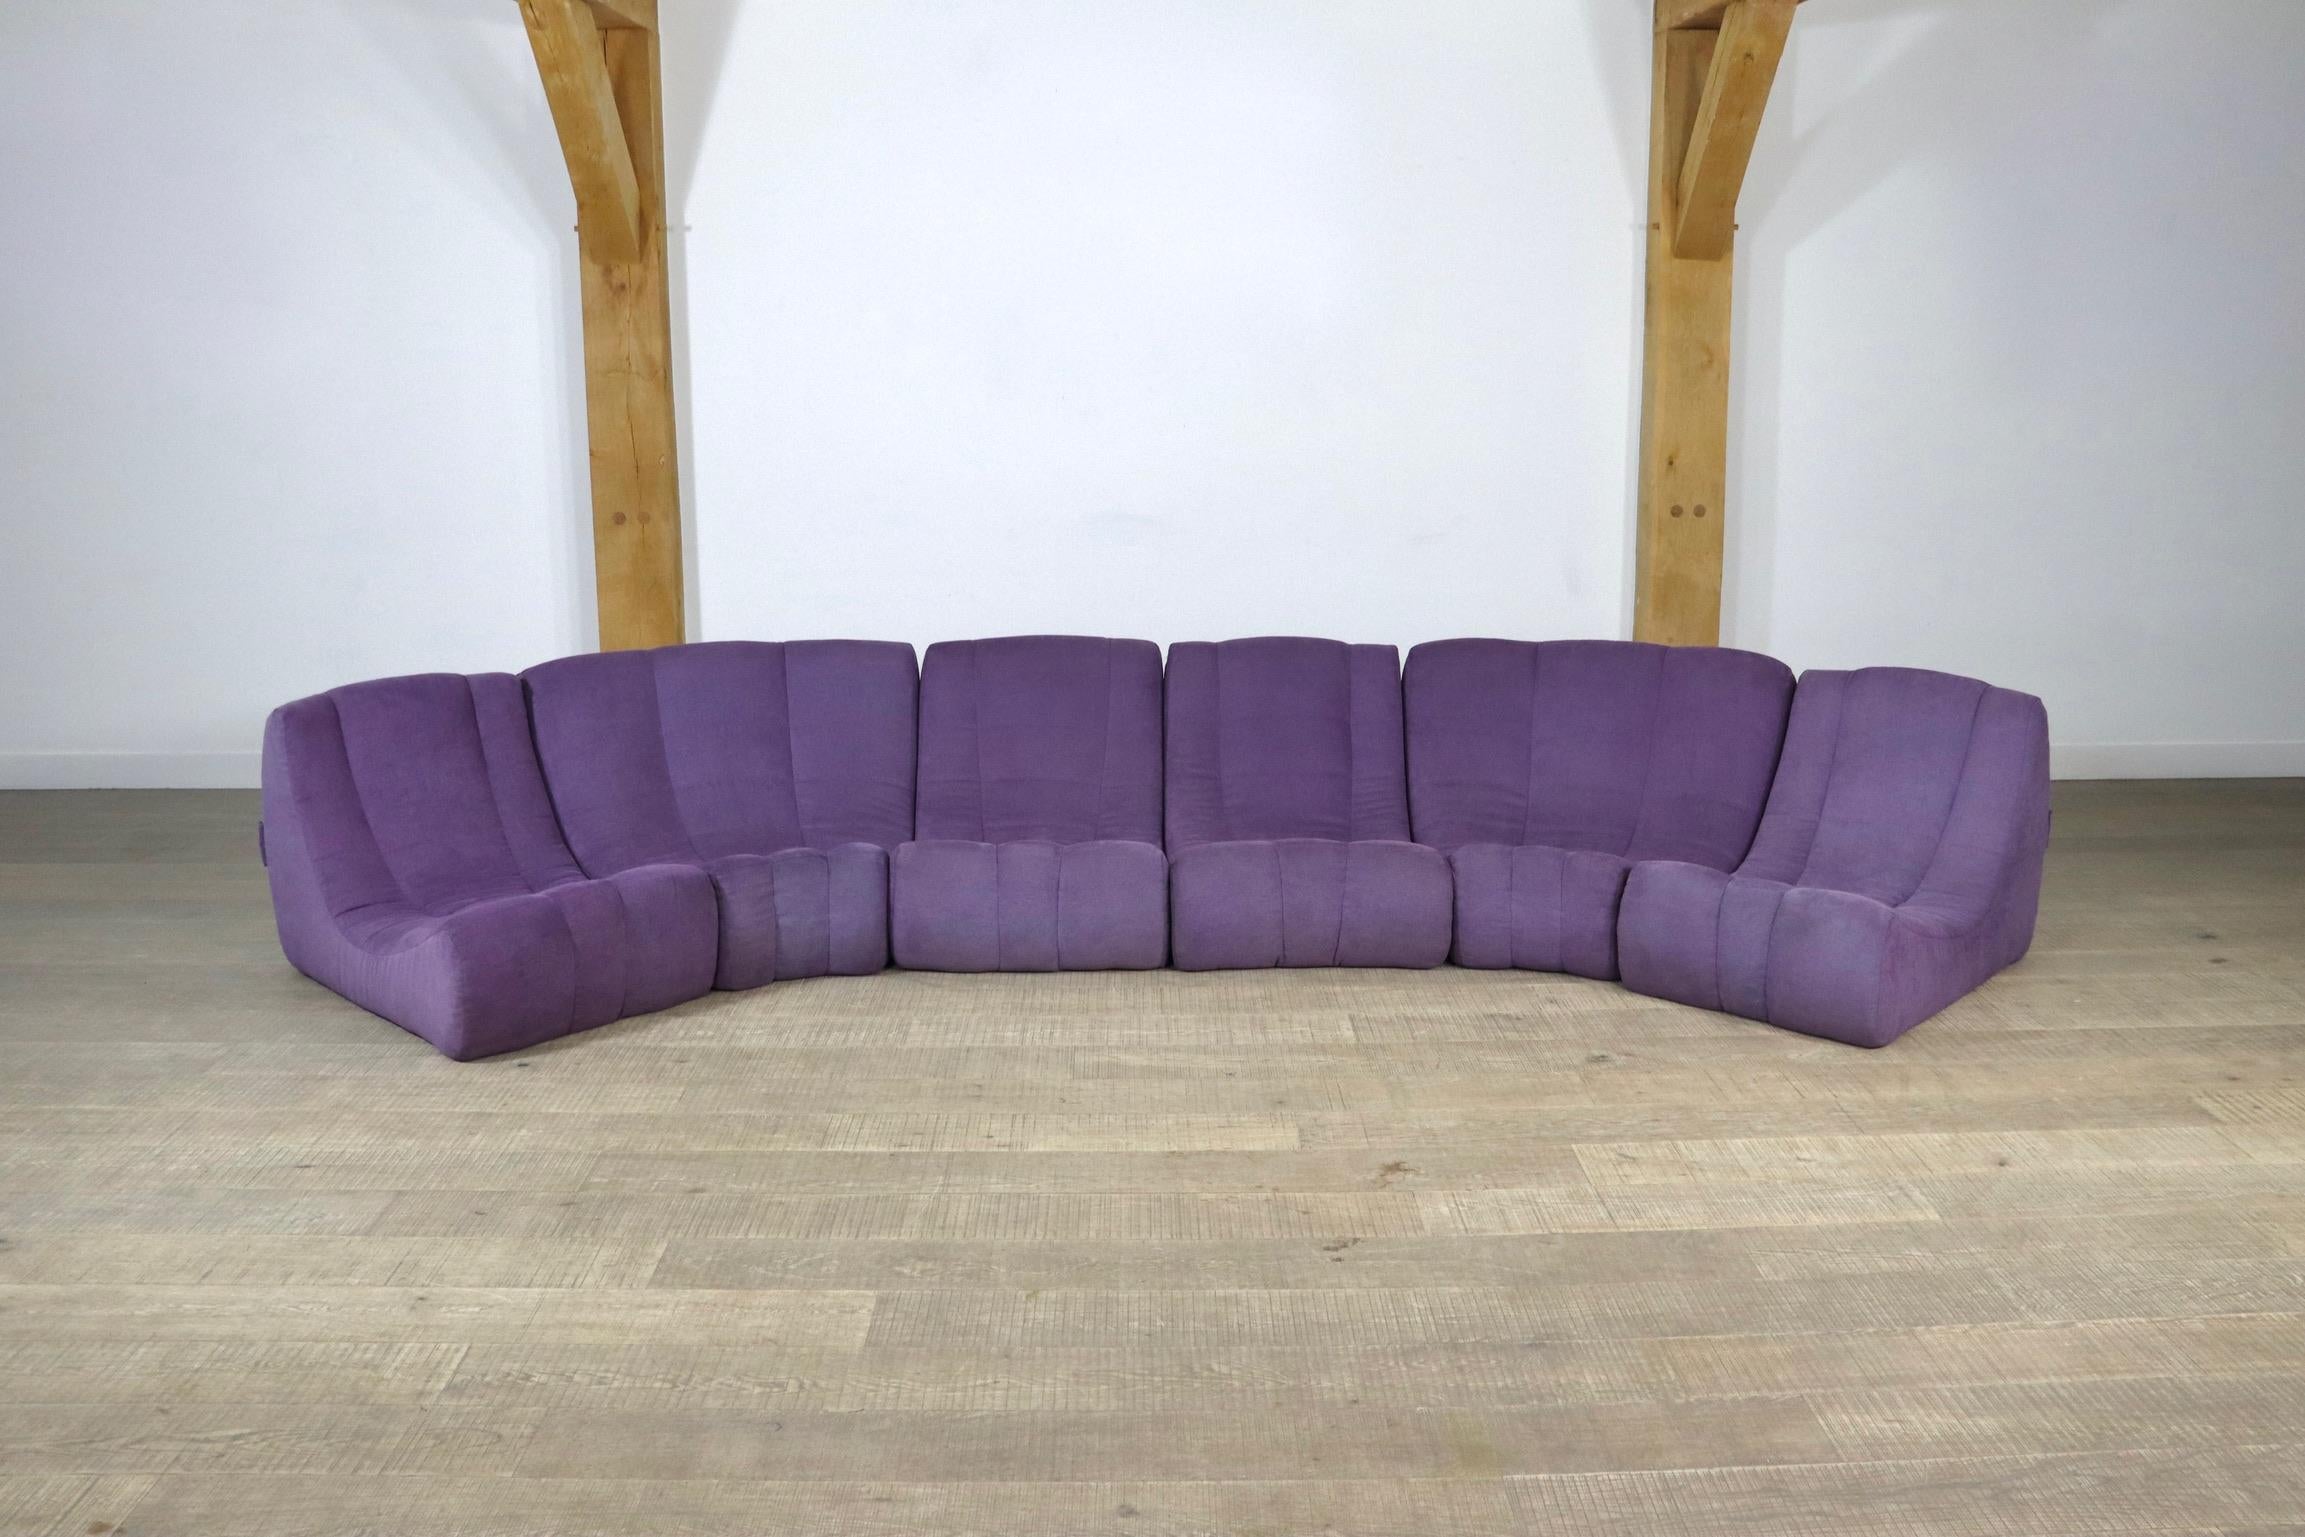 Rare 'Gilda' sofa by Michel Ducaroy made in 1972. This early edition is manufactured by 'Roset', which was the company name of Ligne Roset prior to 1973. The beautiful original purple upholstery fits this groovy design really well. This sofa